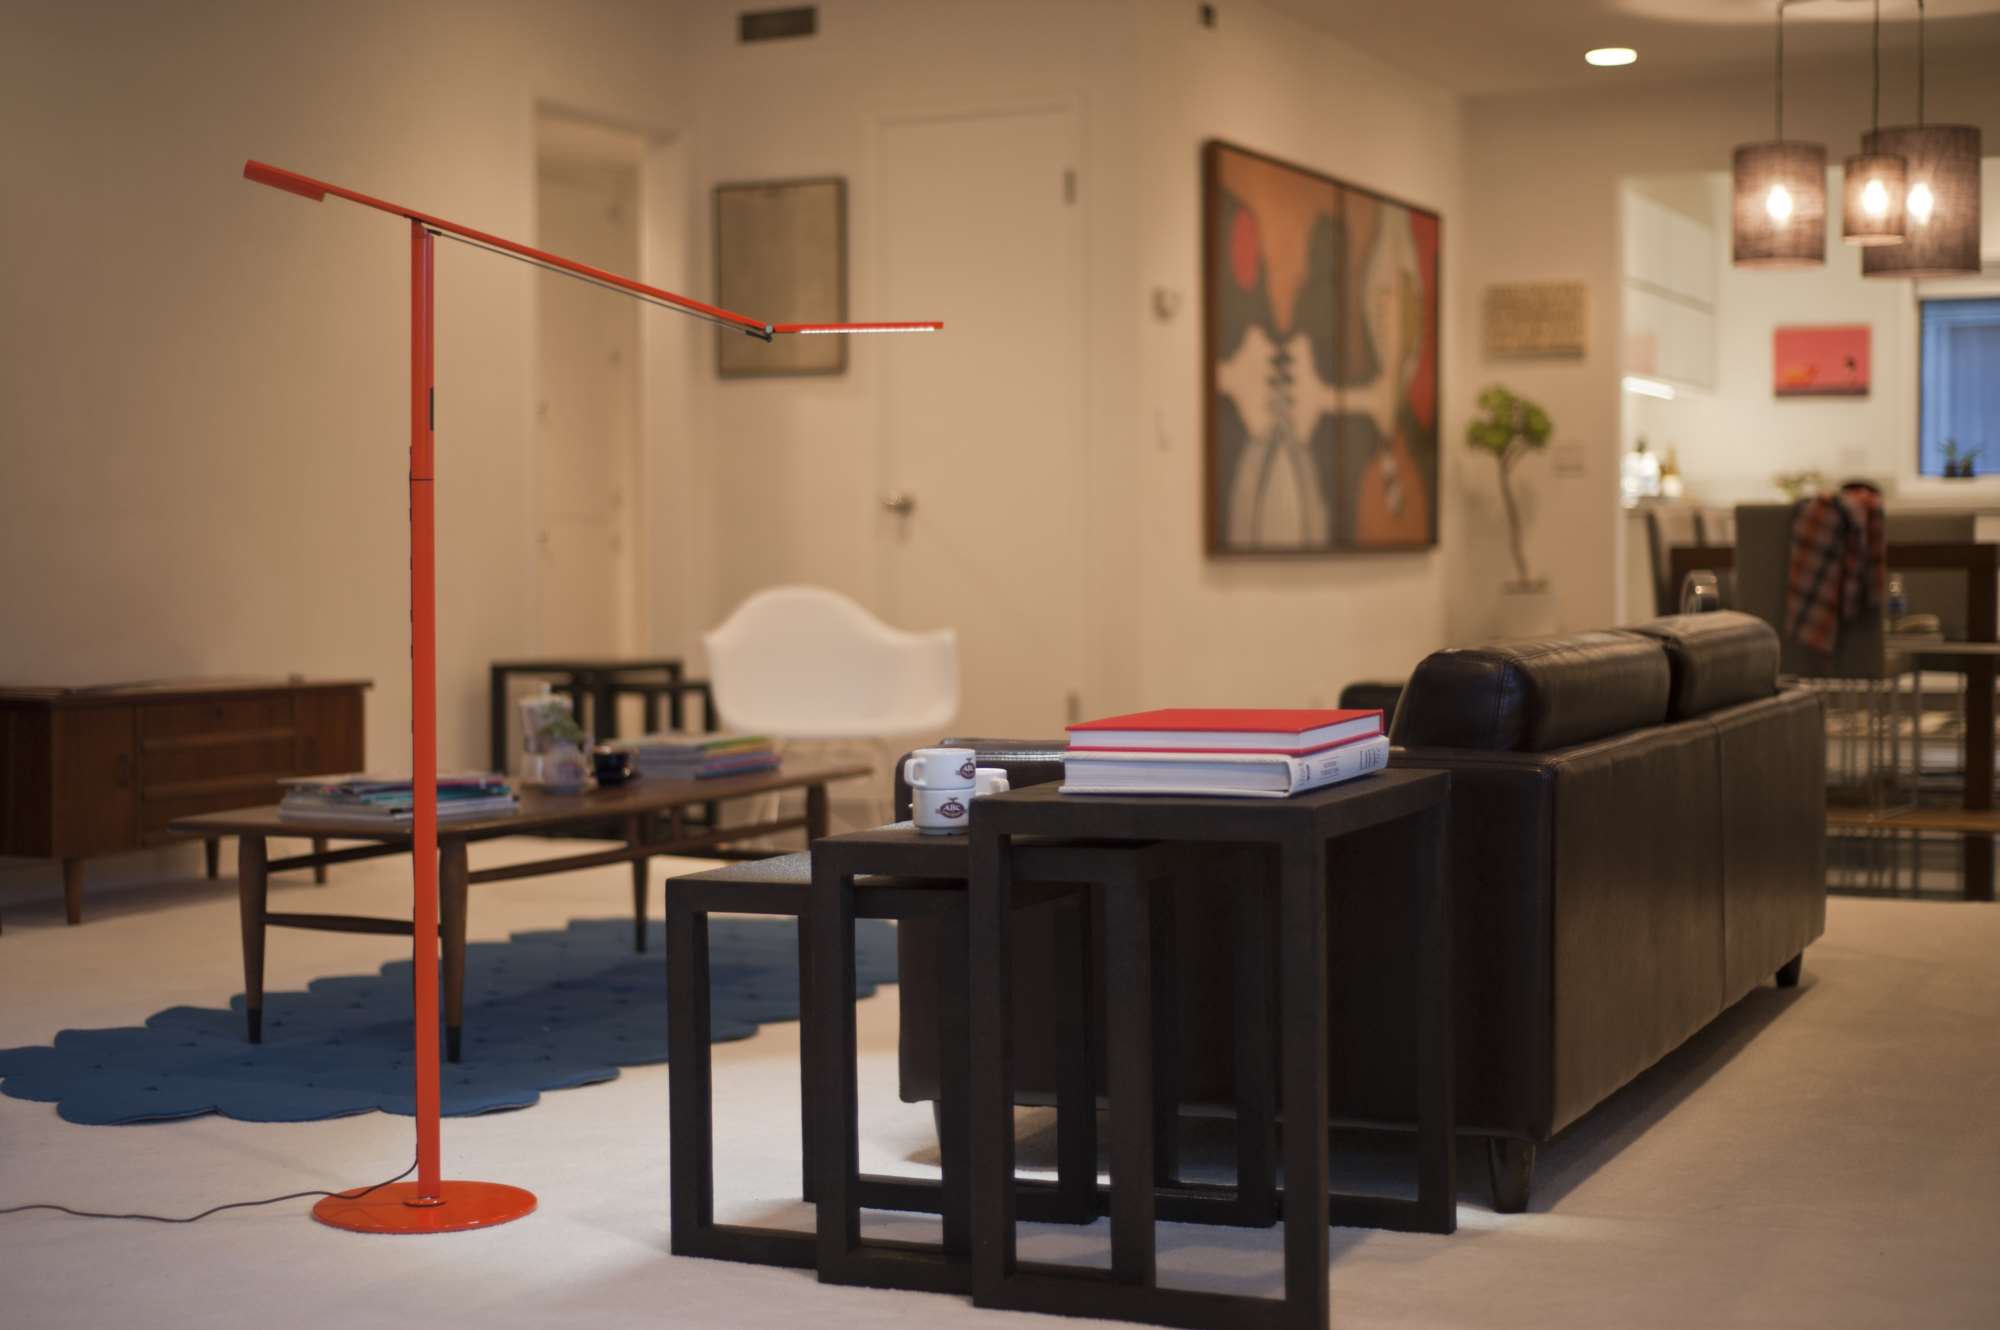 Purchase the Equo Gen 3 Floor Lamp
by Koncept today.